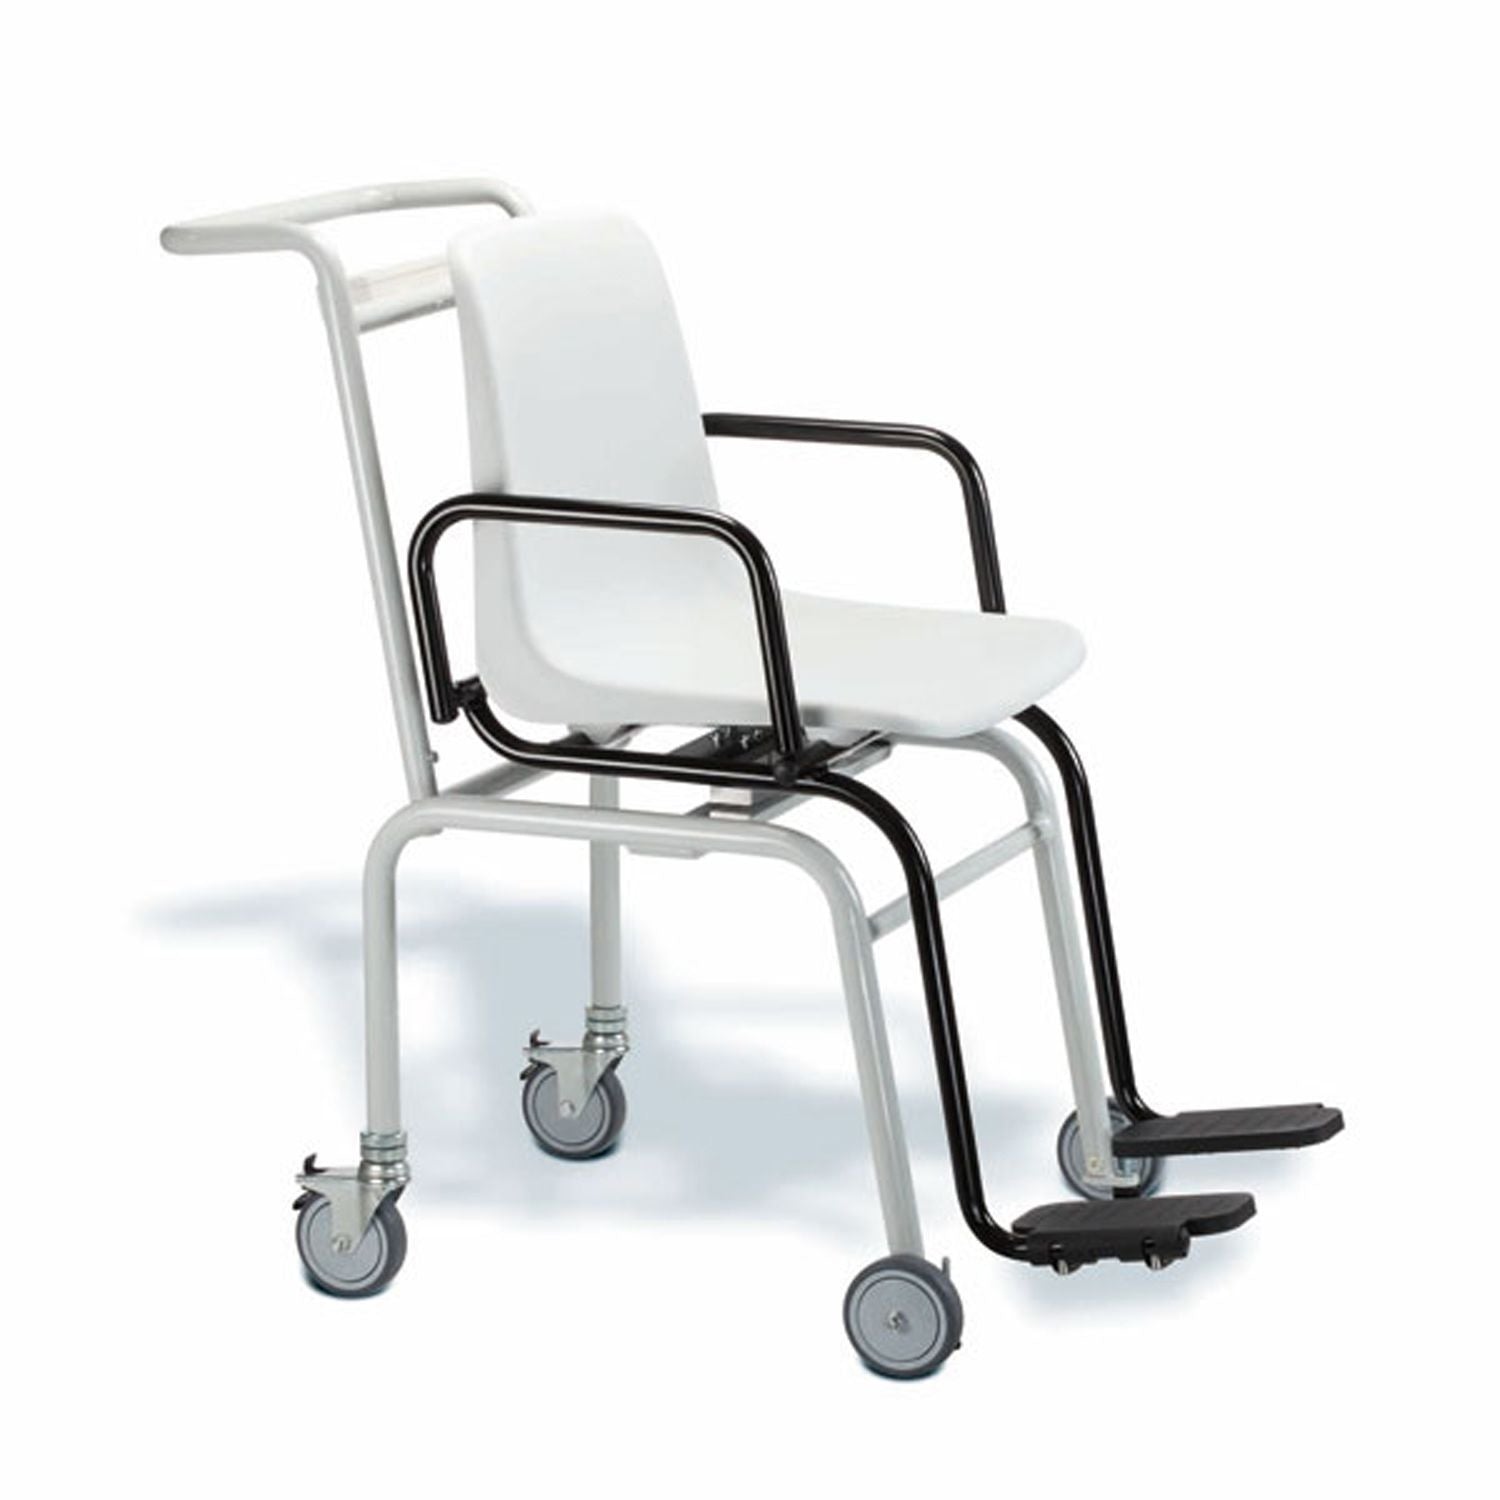 seca 955 Class III Approved Electronic Chair Scales